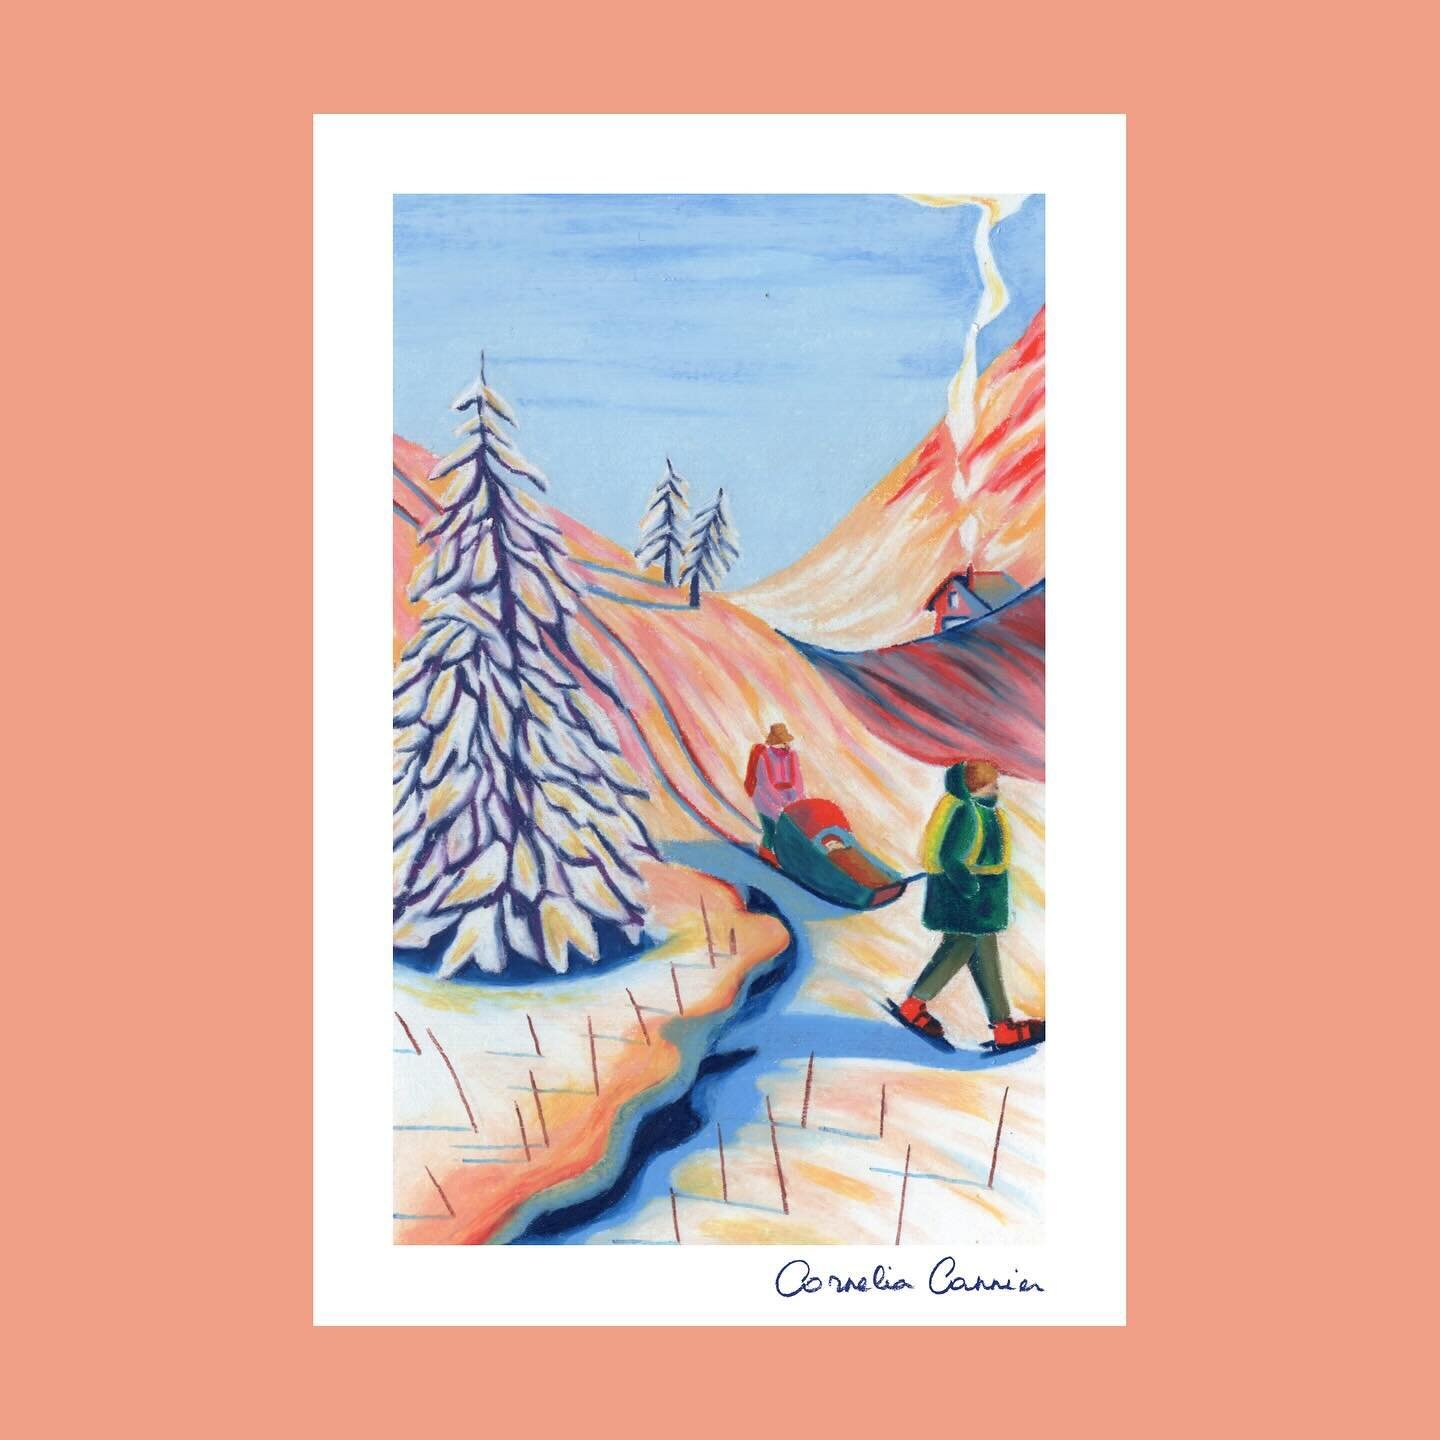 De futures longues balades &agrave; trois ❤️ 

#illustration #womenempowerment #mountaindrawing #momillustrator #pink #snow